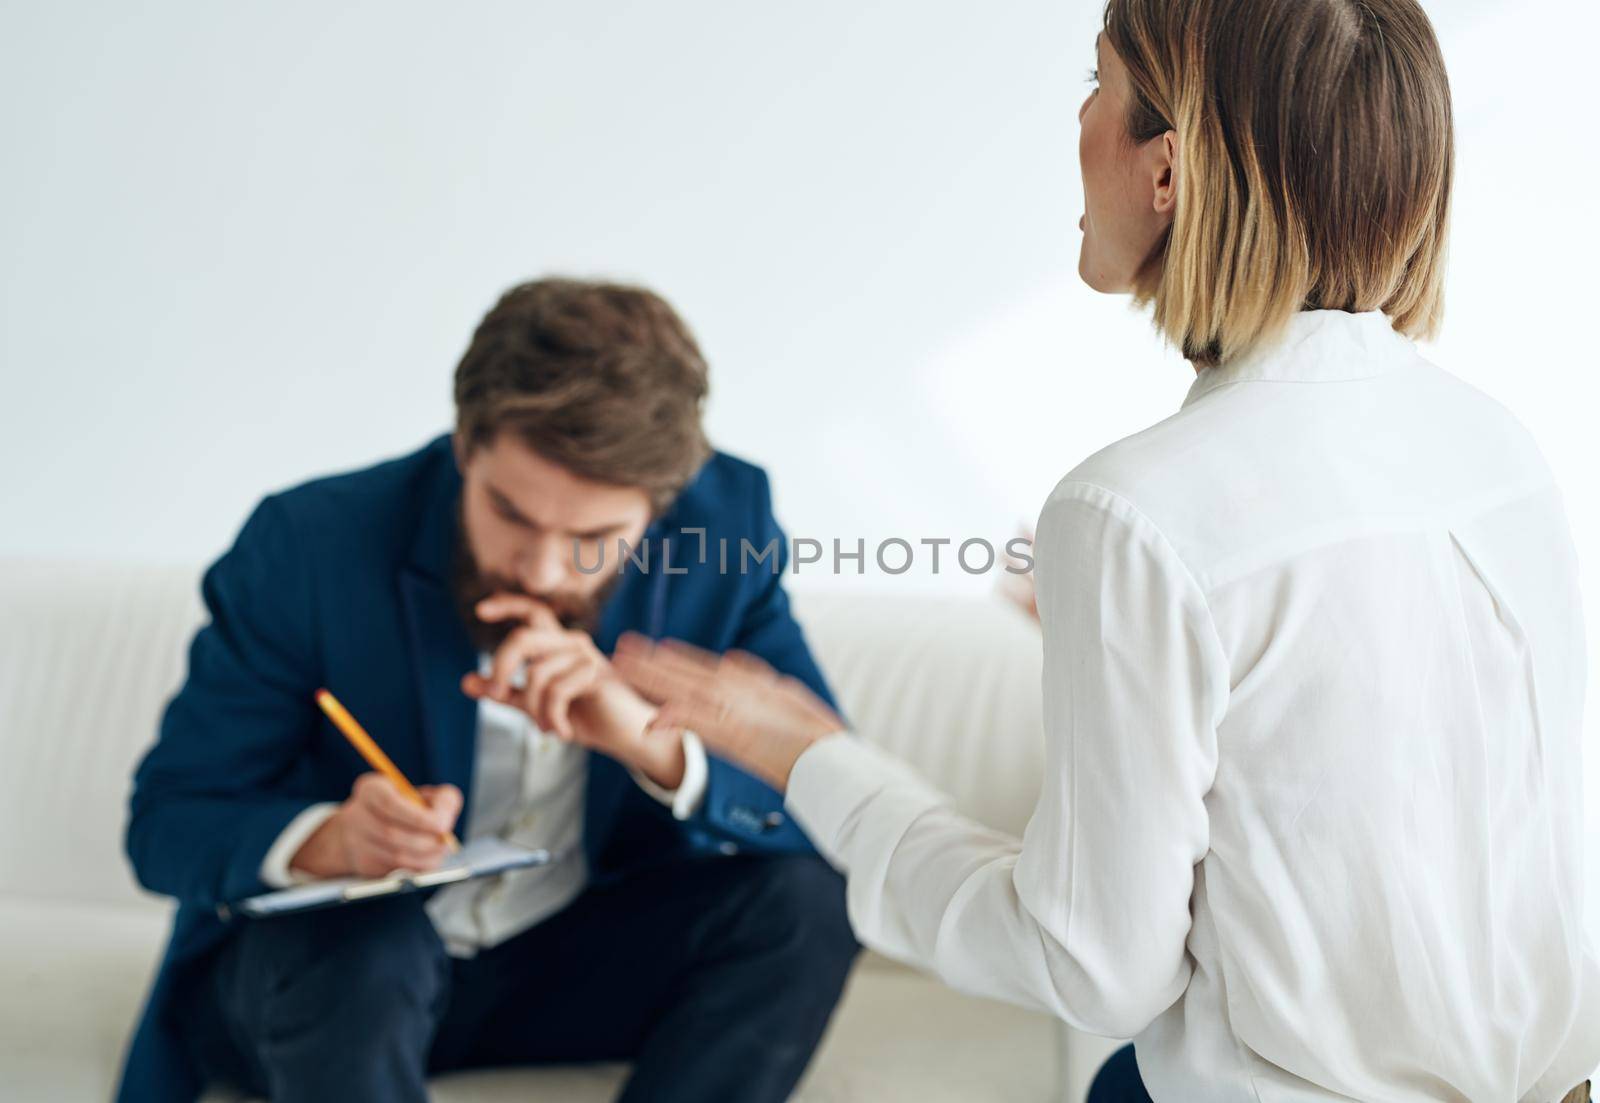 business man and woman communication teamwork officials. High quality photo